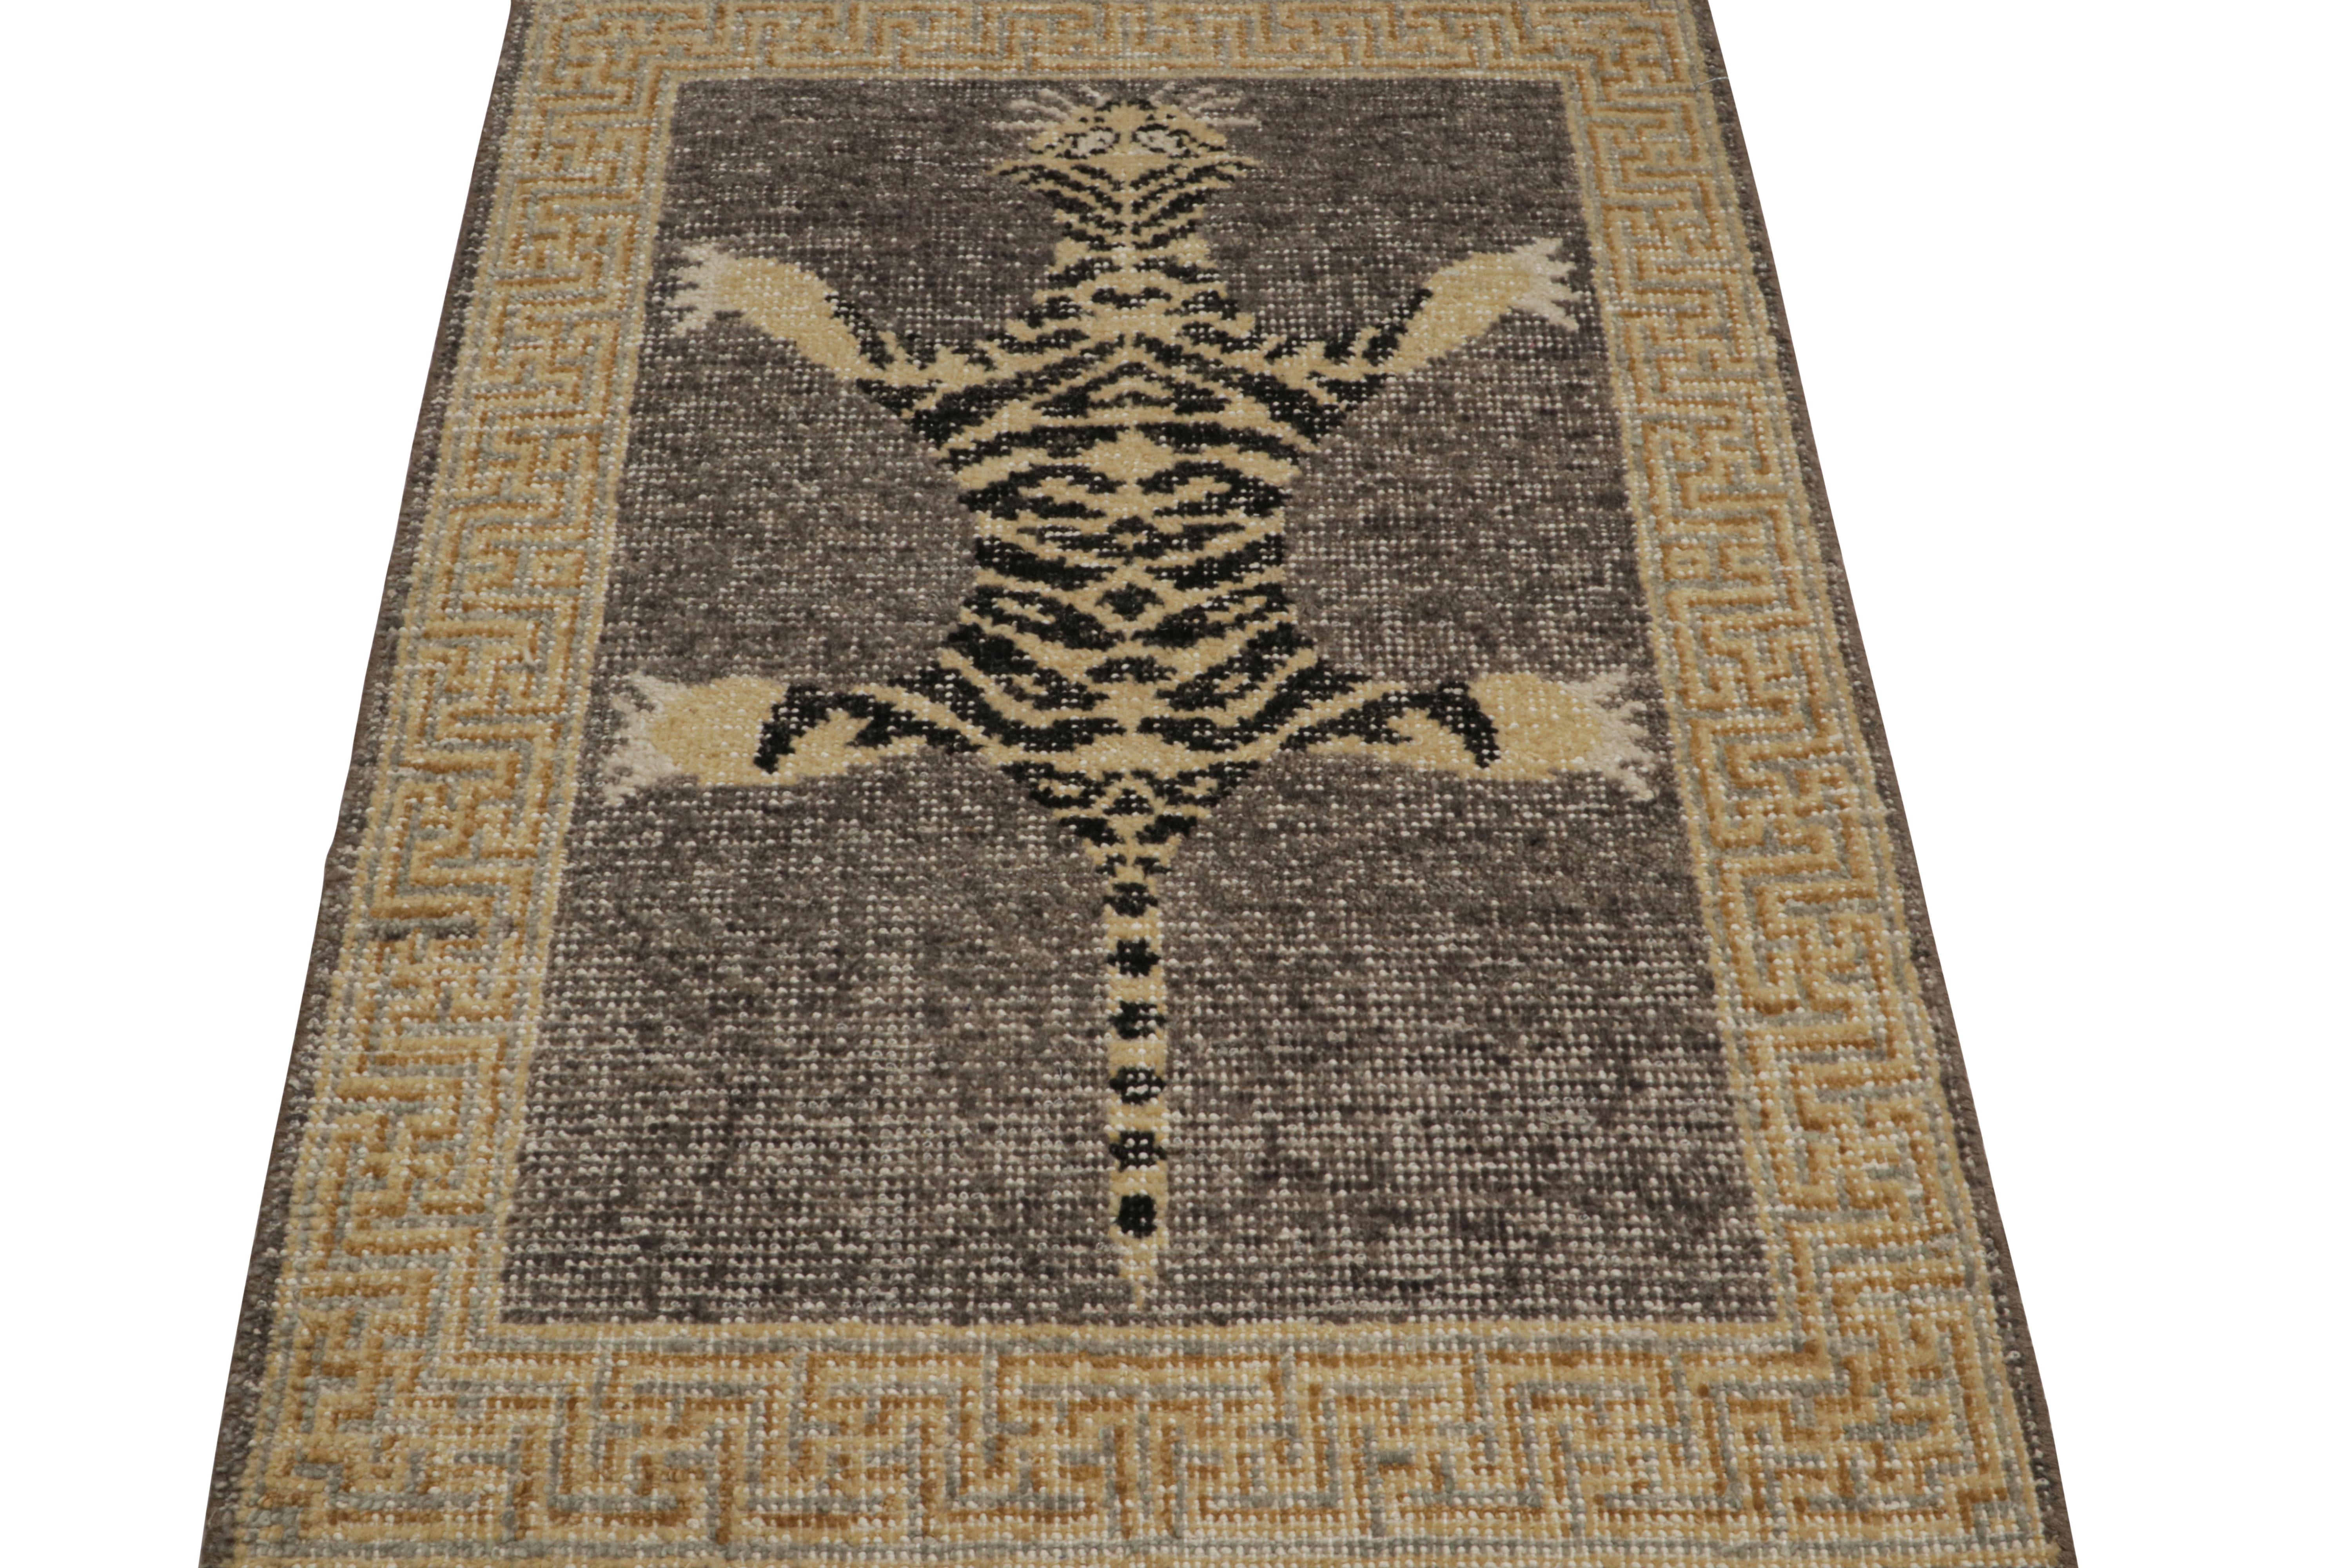 Indian Rug & Kilim’s Modern Tiger Skin Accent Pictorial Rug in Gray, Beige and Black For Sale